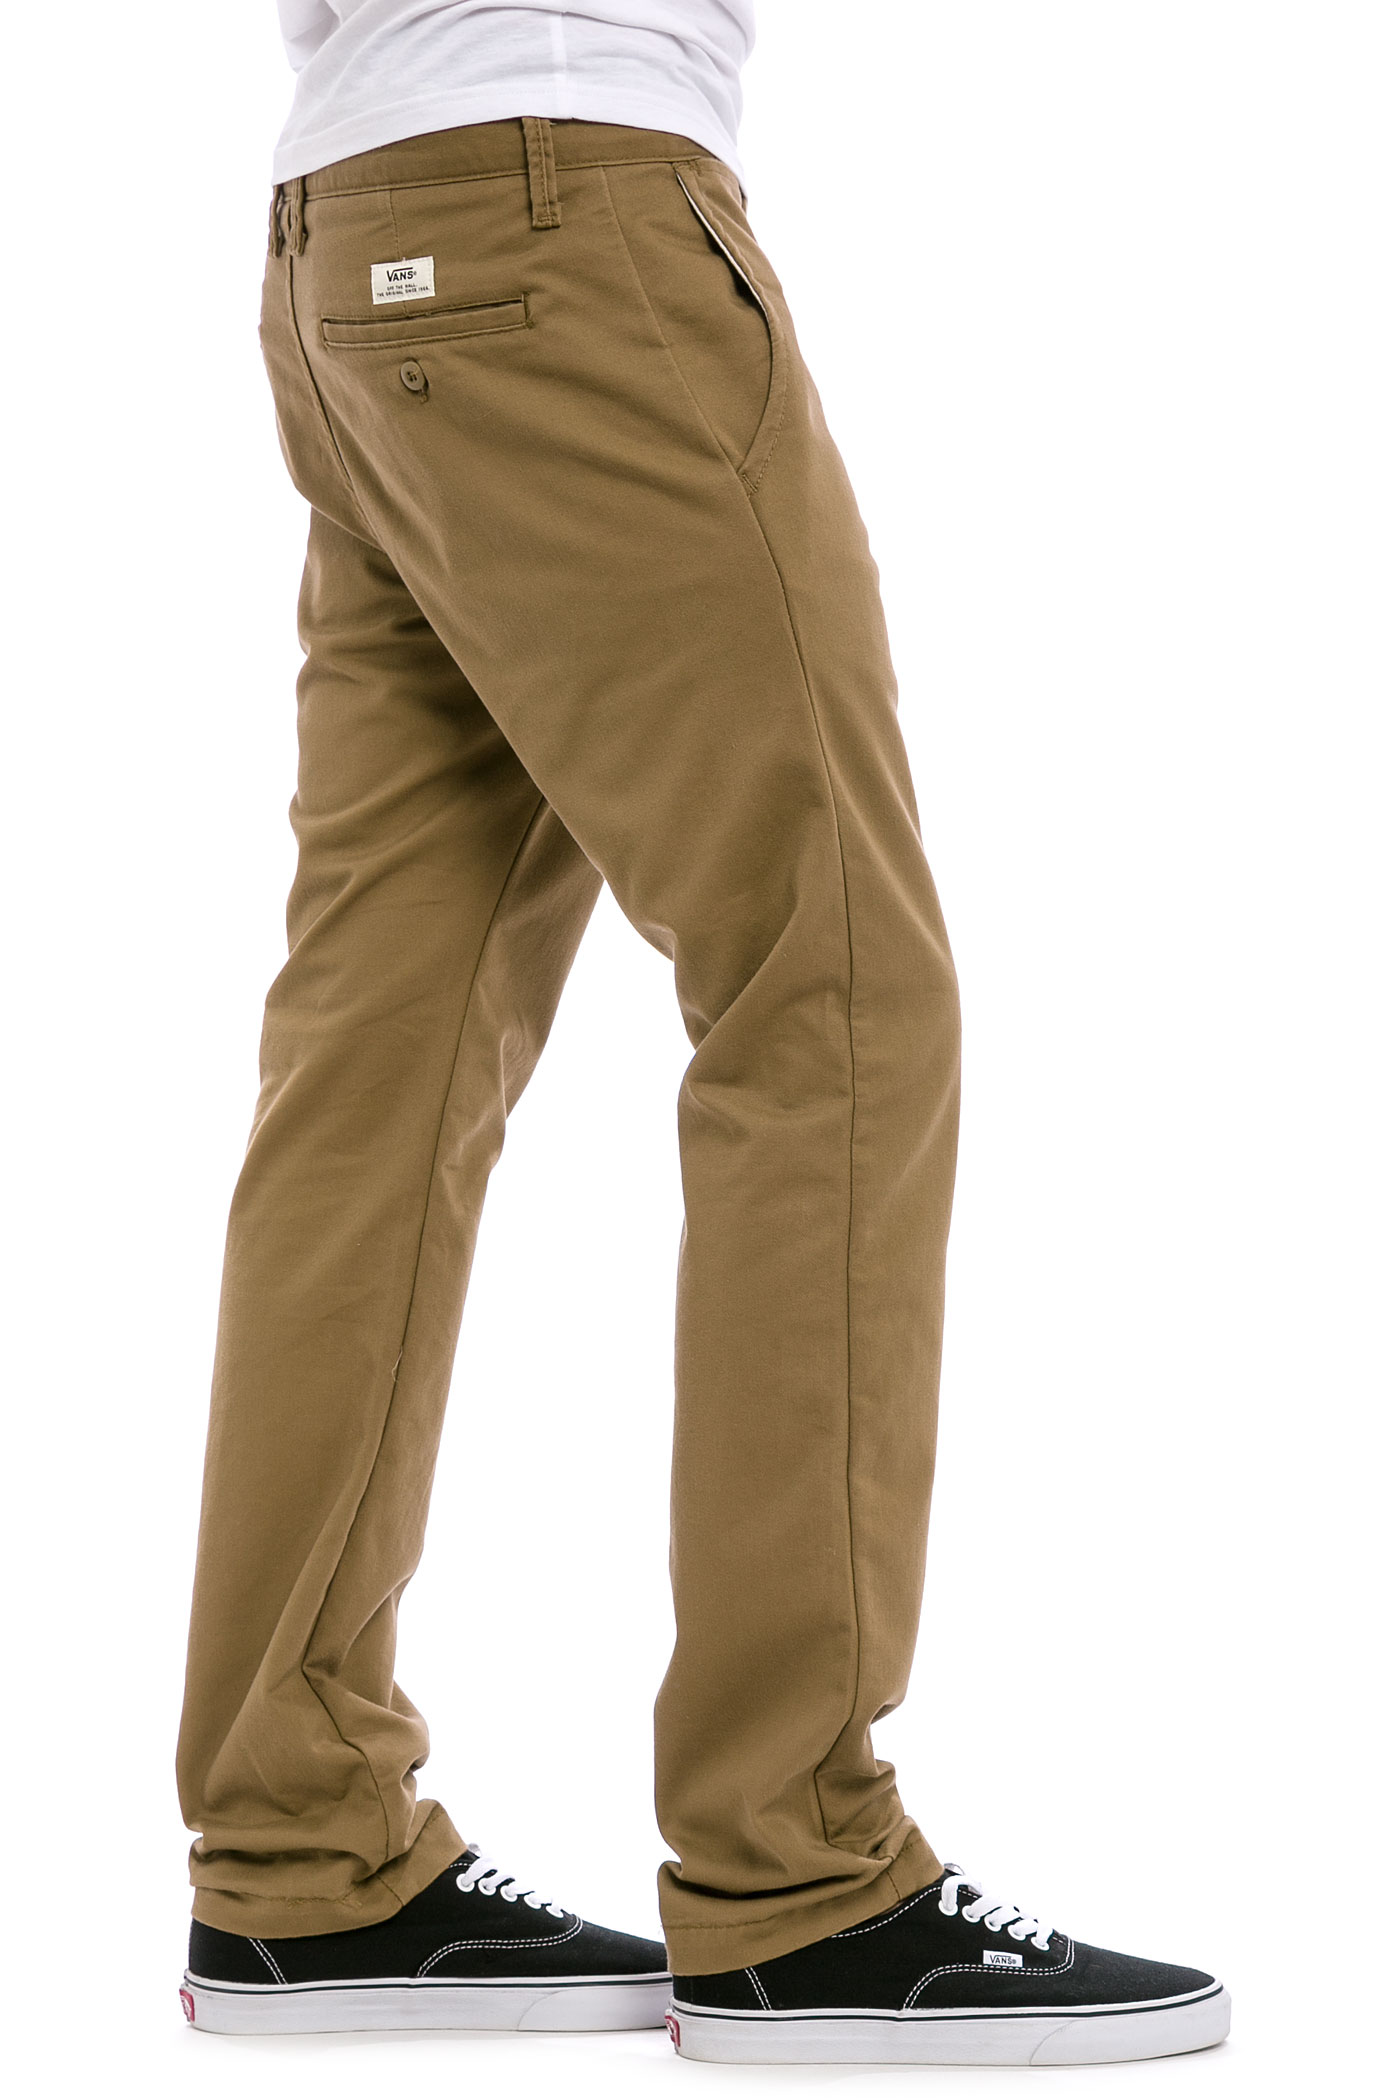 Vans Authentic Chino Stretch Pants (dirt) buy at skatedeluxe